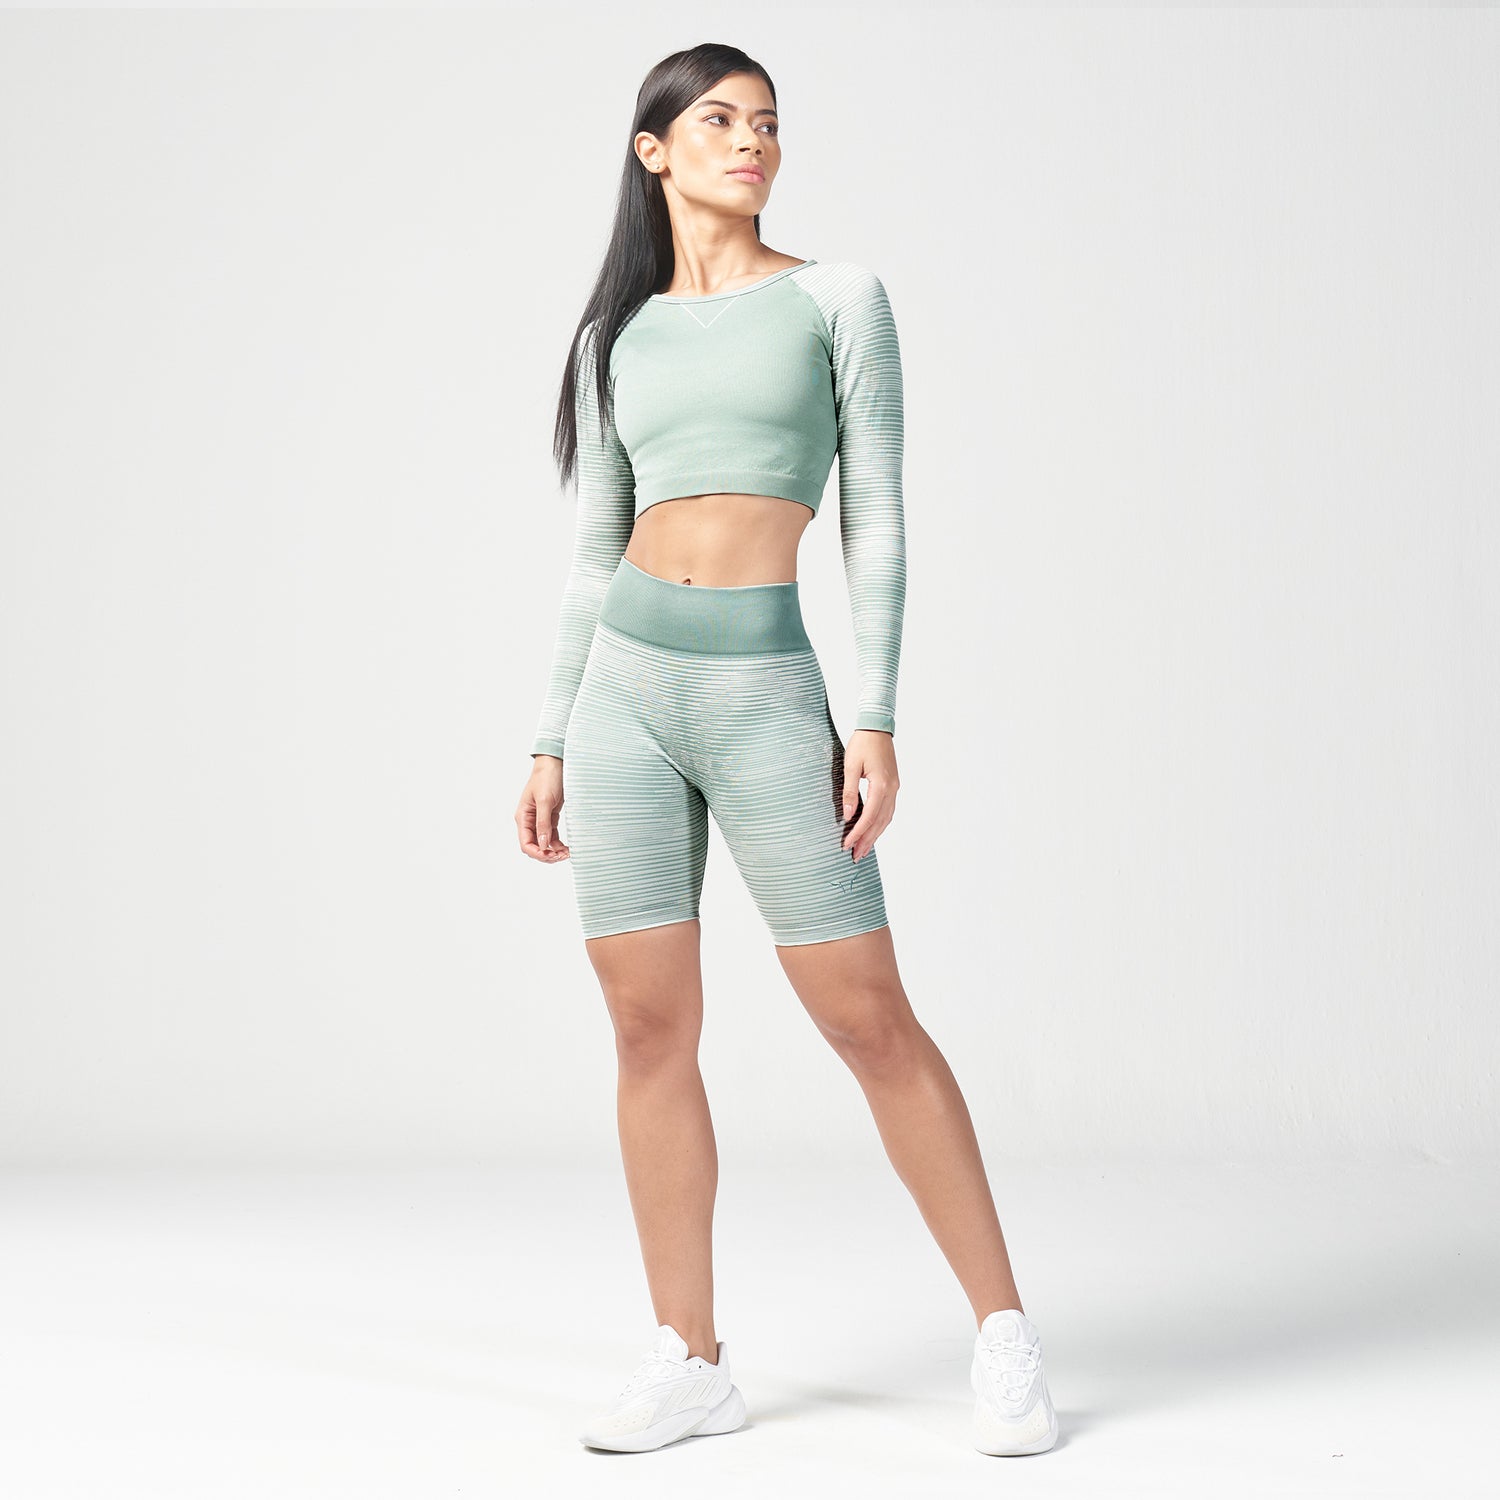 squatwolf-workout-clothes-infinity-stripe-seamless-crop-top-green-surf-gym-t-shirts-for-women